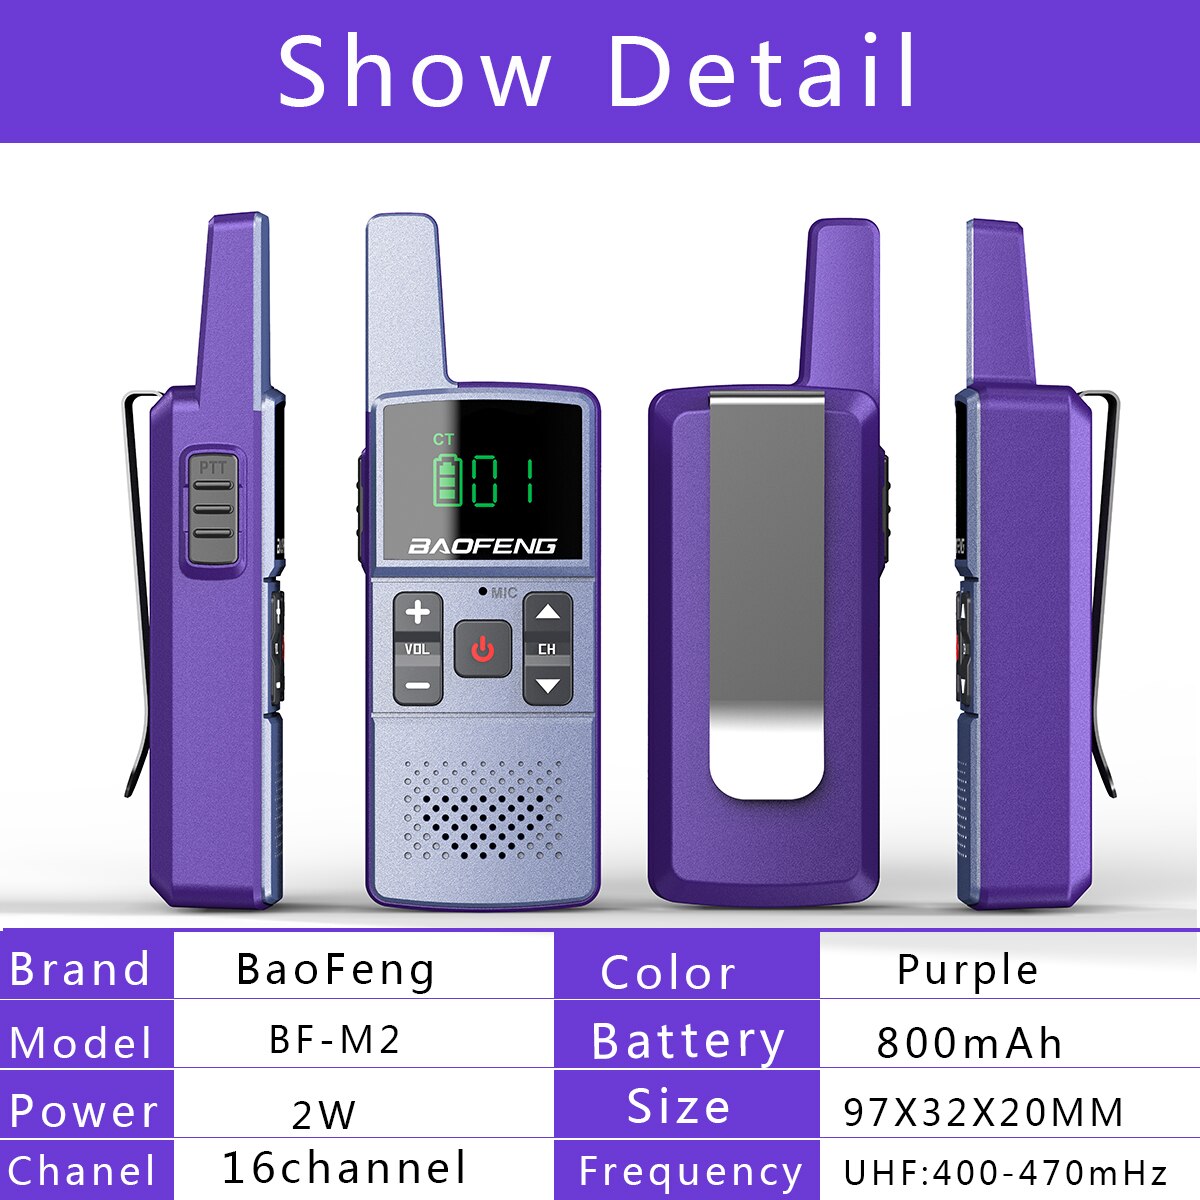 1/2pcs baofeng walkie talkie M1/M2 UHF 400-470MHz 16CH Portable Two Way Radio with Headset 888S transceiver Surport USB Charging